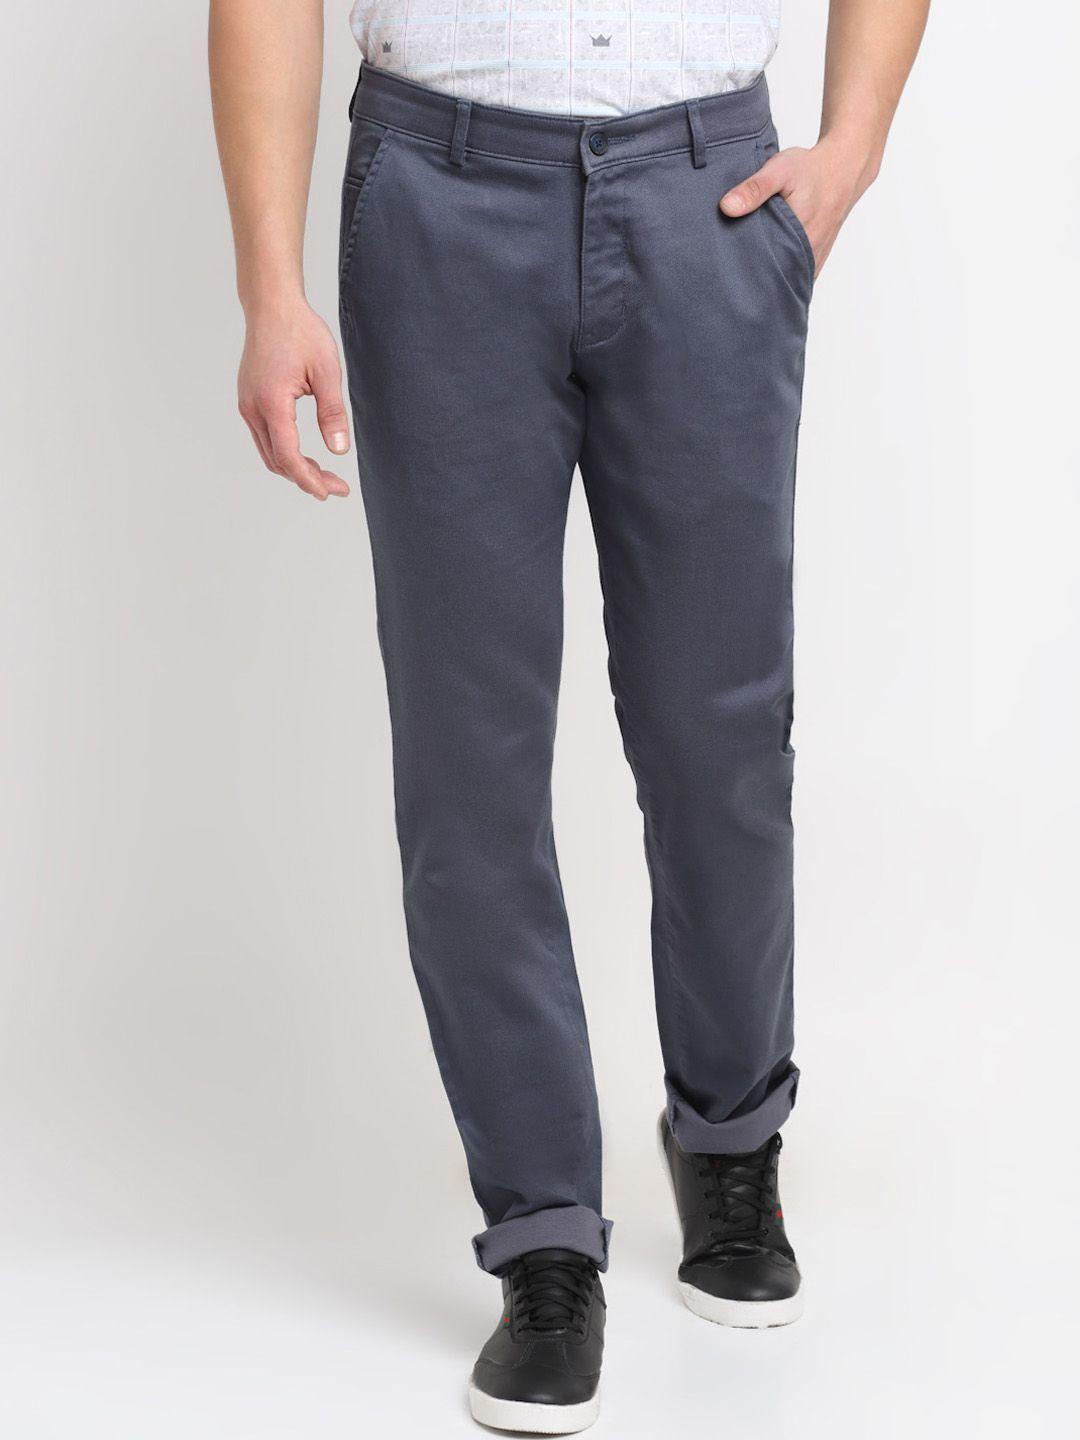 cantabil-men-grey-solid-cotton-regular-fit-trousers